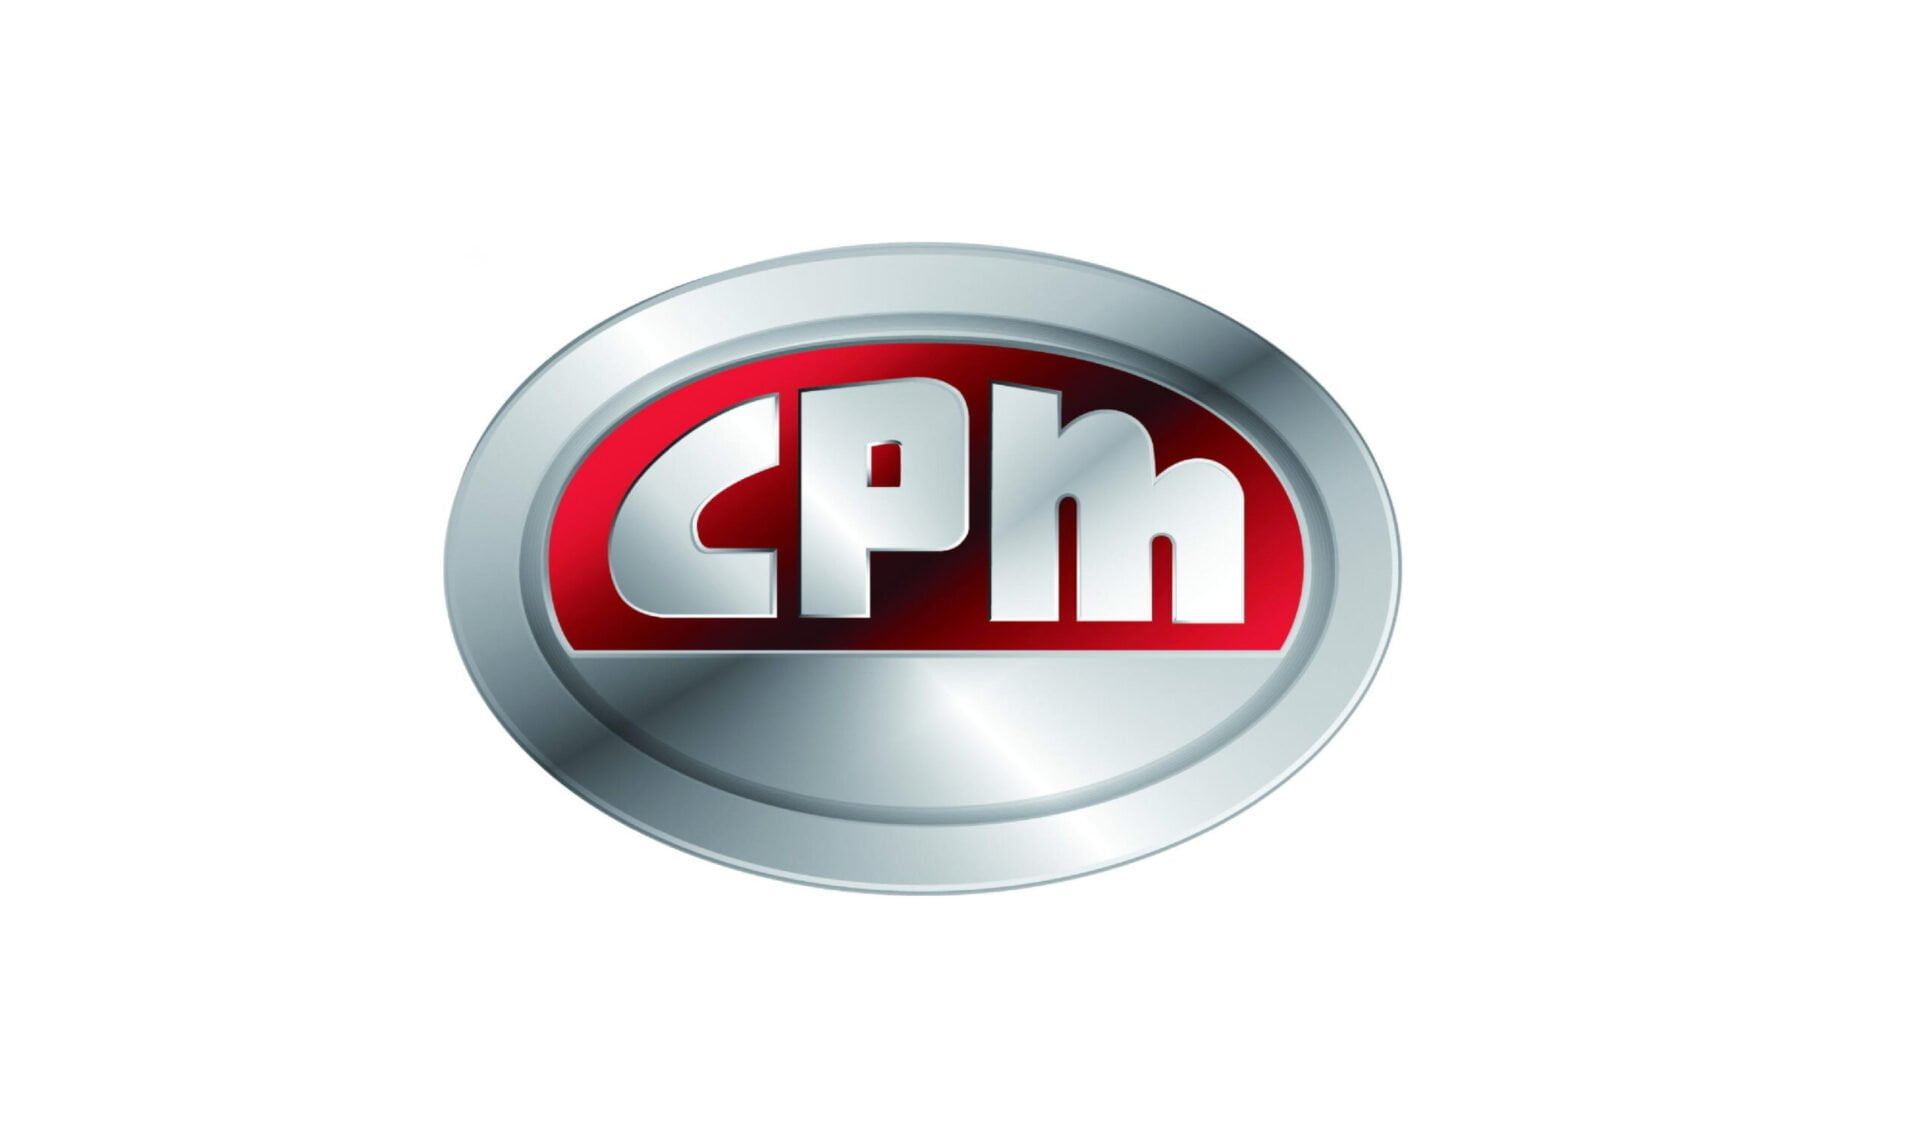 CPM logo in red and silver